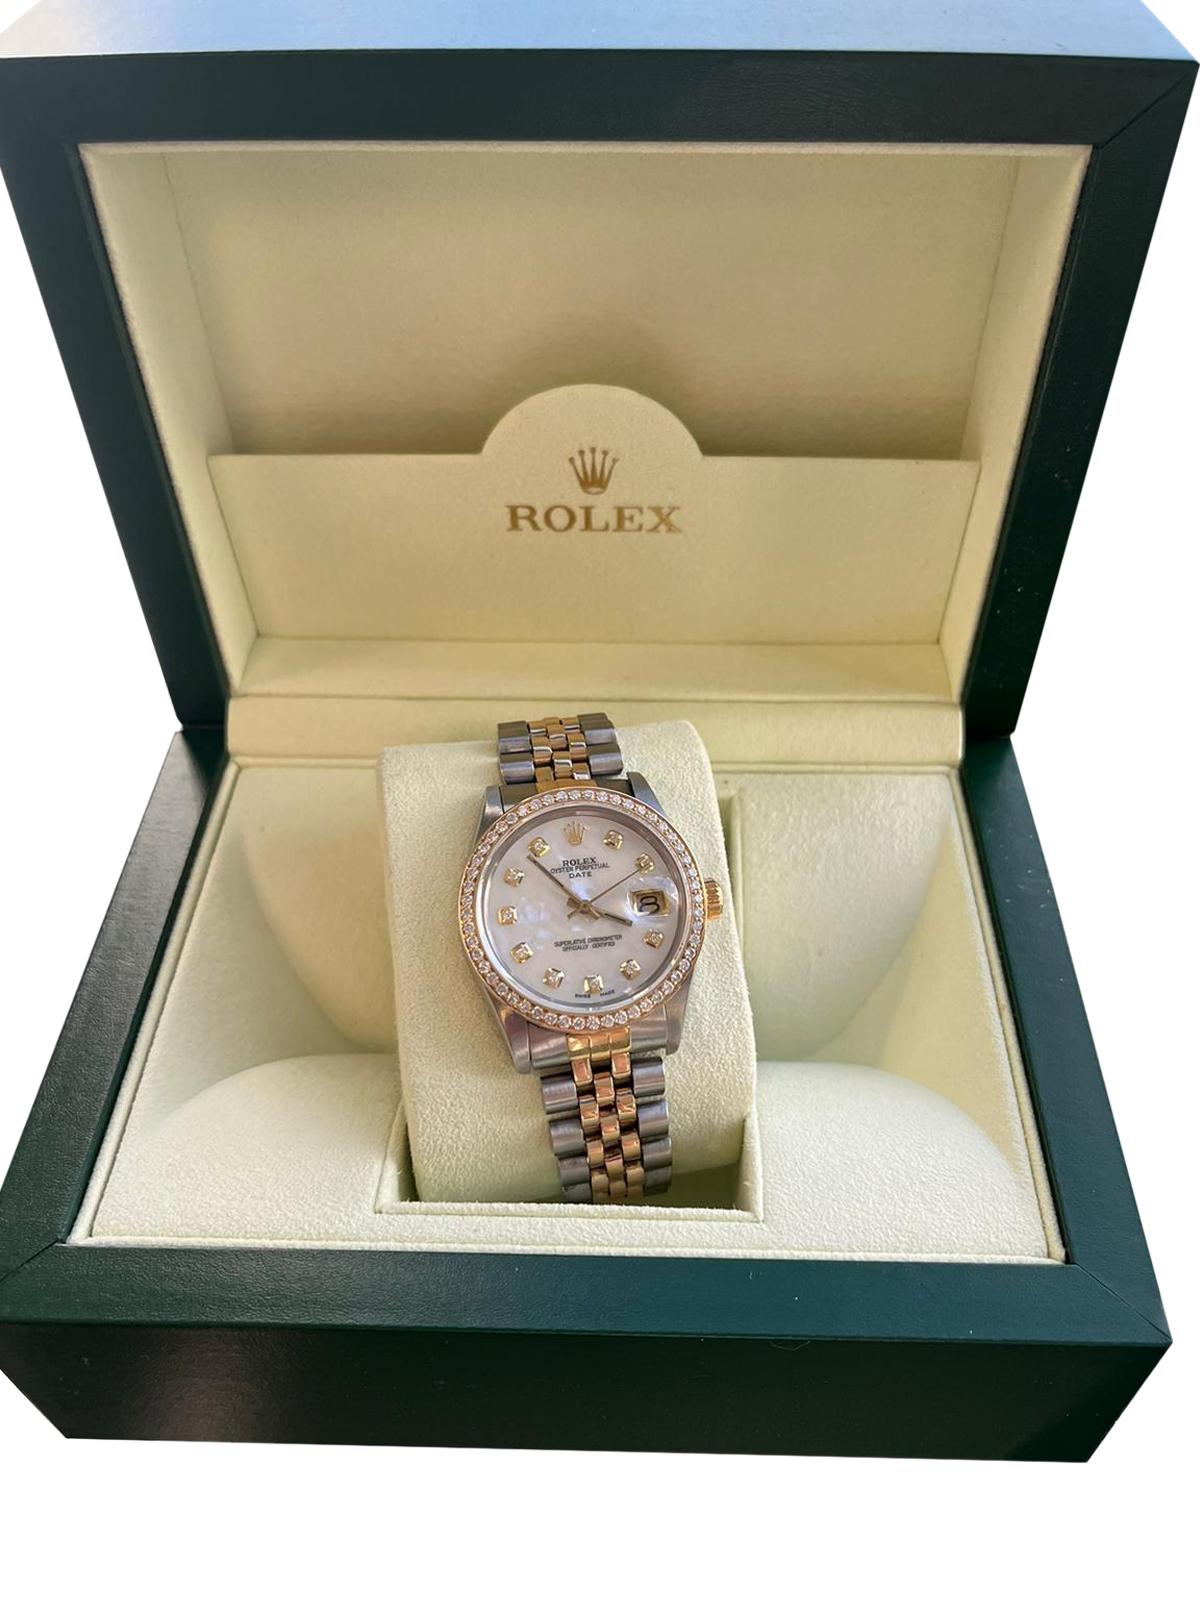 Rolex Oyster Perpetual Date, Reference Number: 15053, Case Size/Material: 34mm Stainless Steel/Gold, Aftermarket Natural Diamond Bezel, Aftermarket Mother of Pearls Diamond Hour Markers (Dial), with Automatic Movement, Stainless Steel, and Yellow